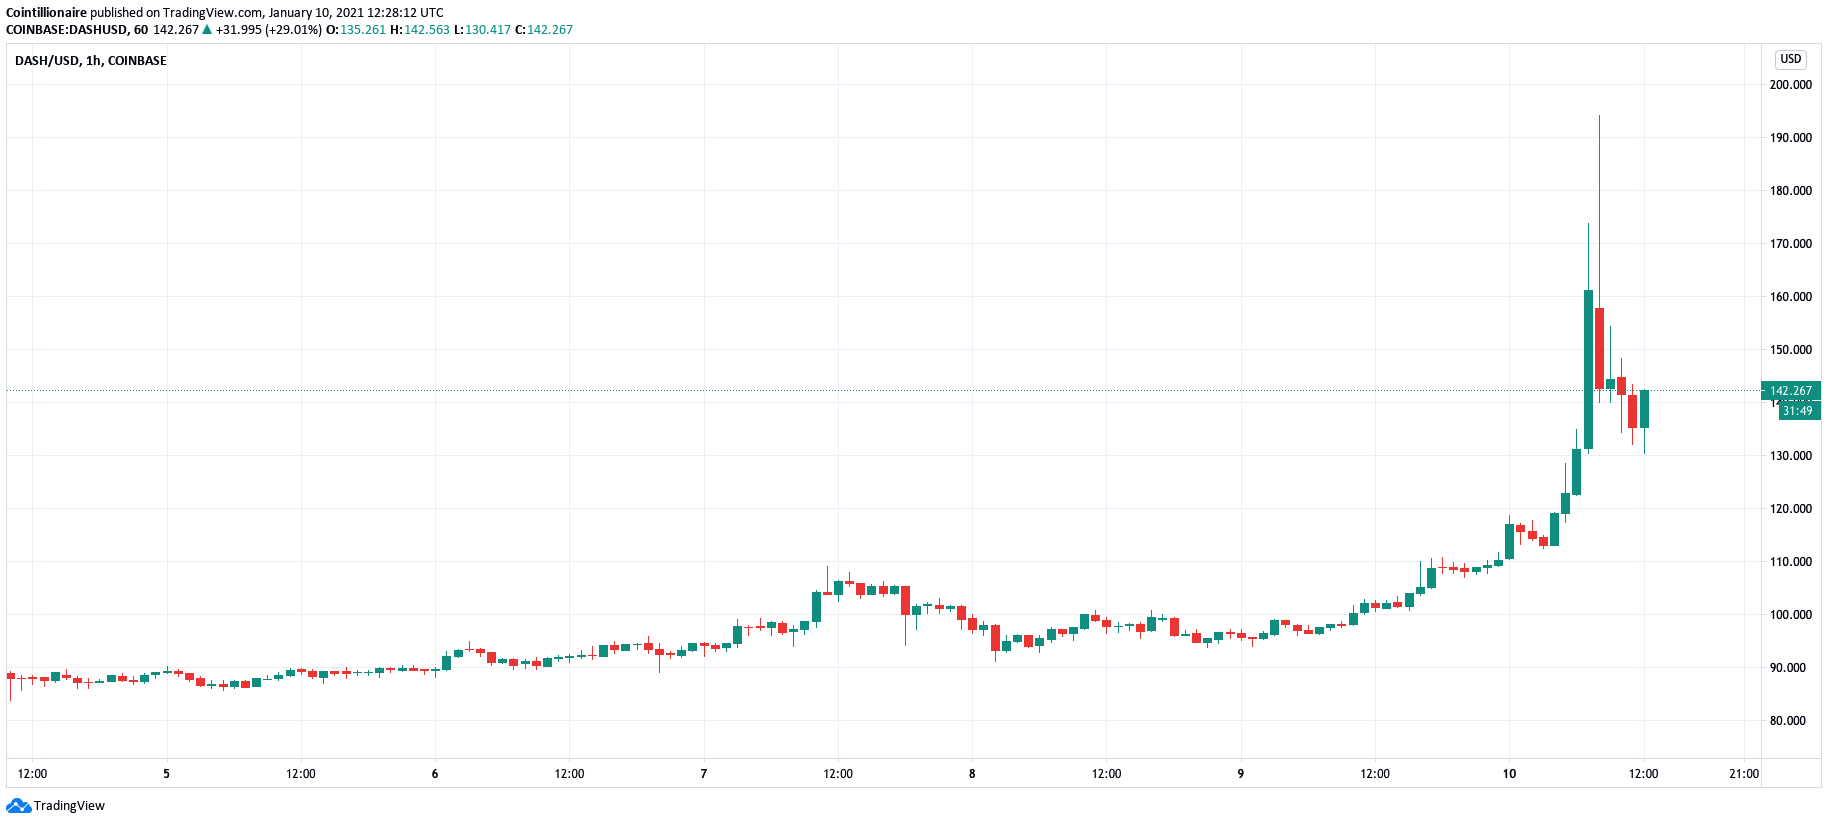 DASH/USD 1-hour candle chart (Coinbase). Source: Tradingview